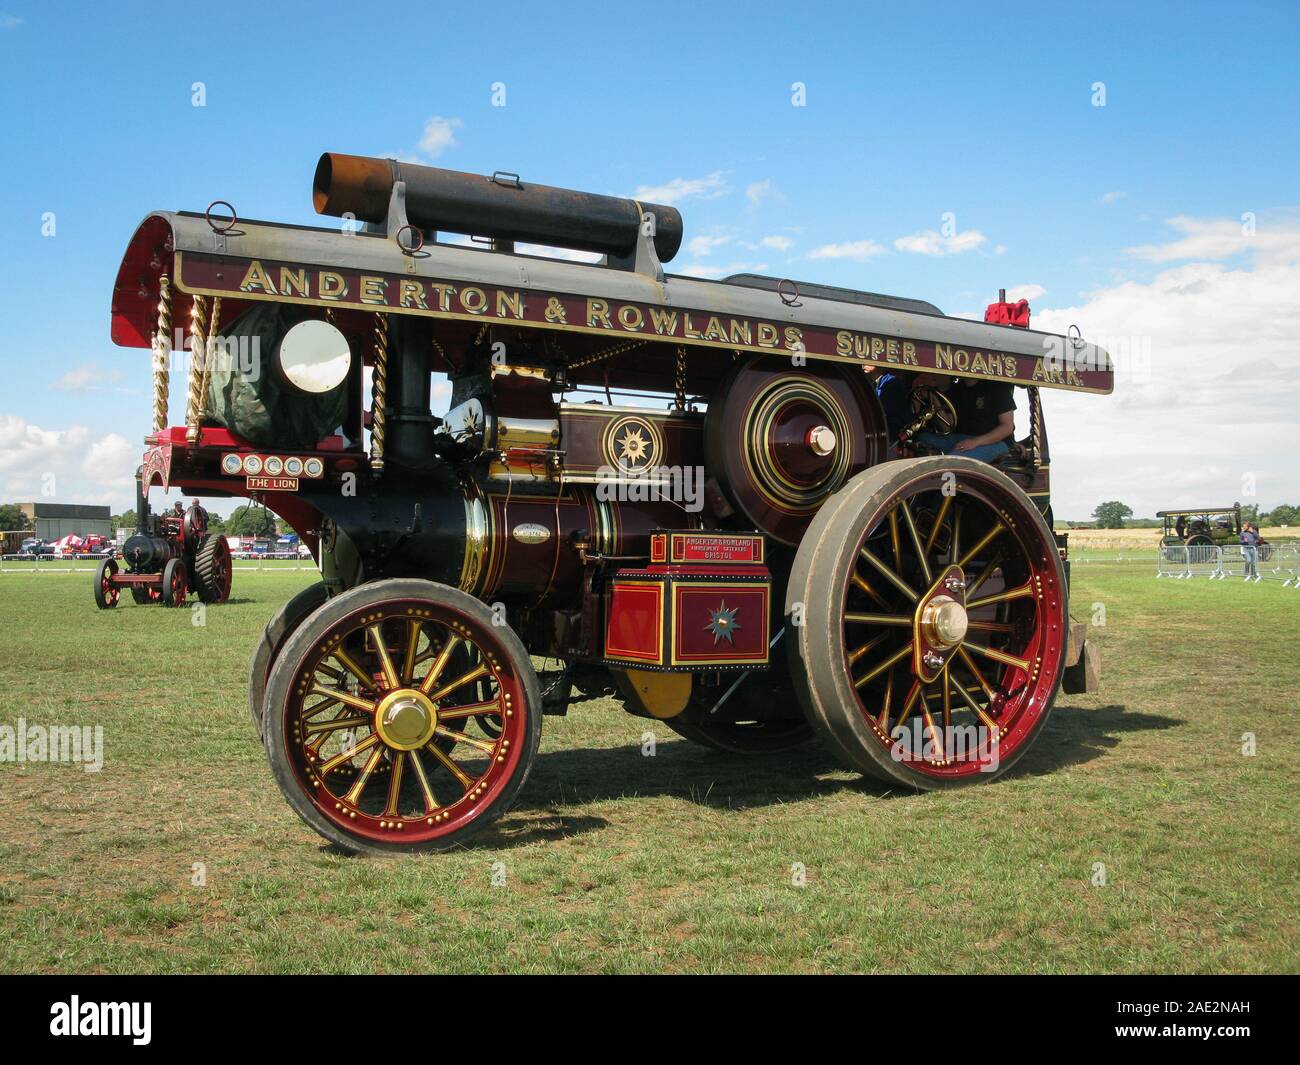 A showmans steam powered traction engine often used for powering fairgrounds and hauling equipment Stock Photo